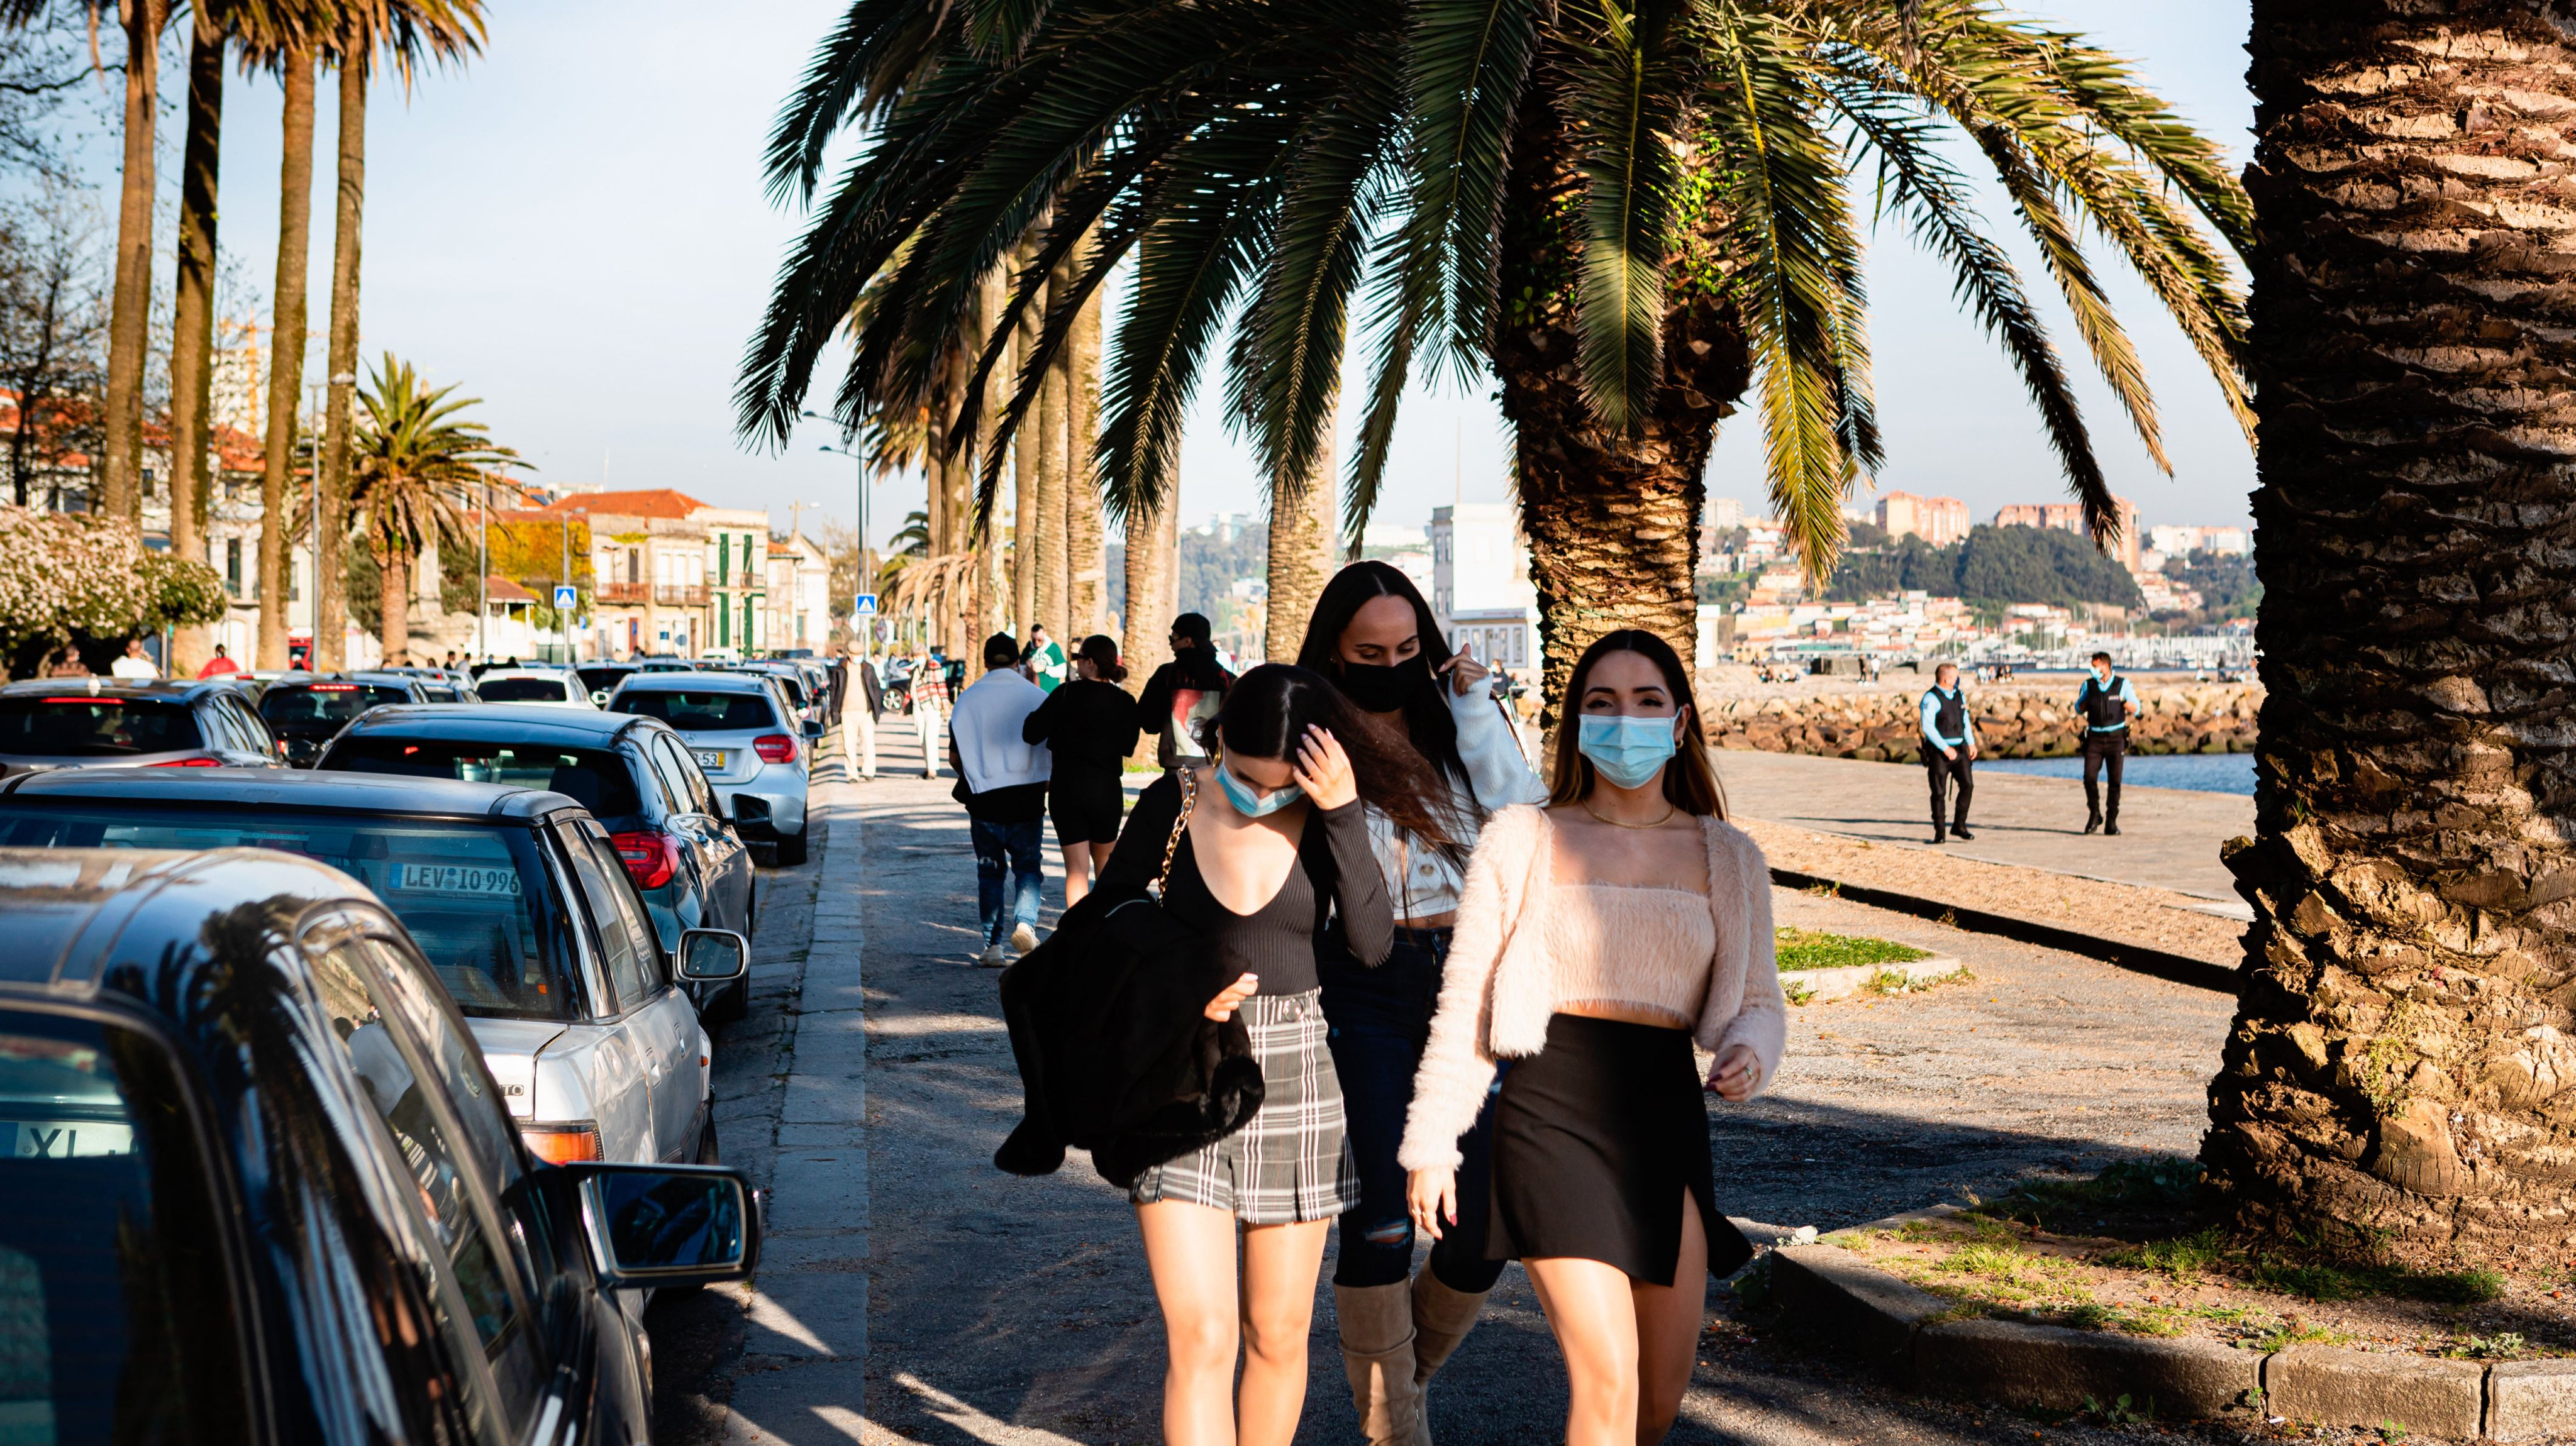 People wearing face masks are seen leaving the Foz area.In